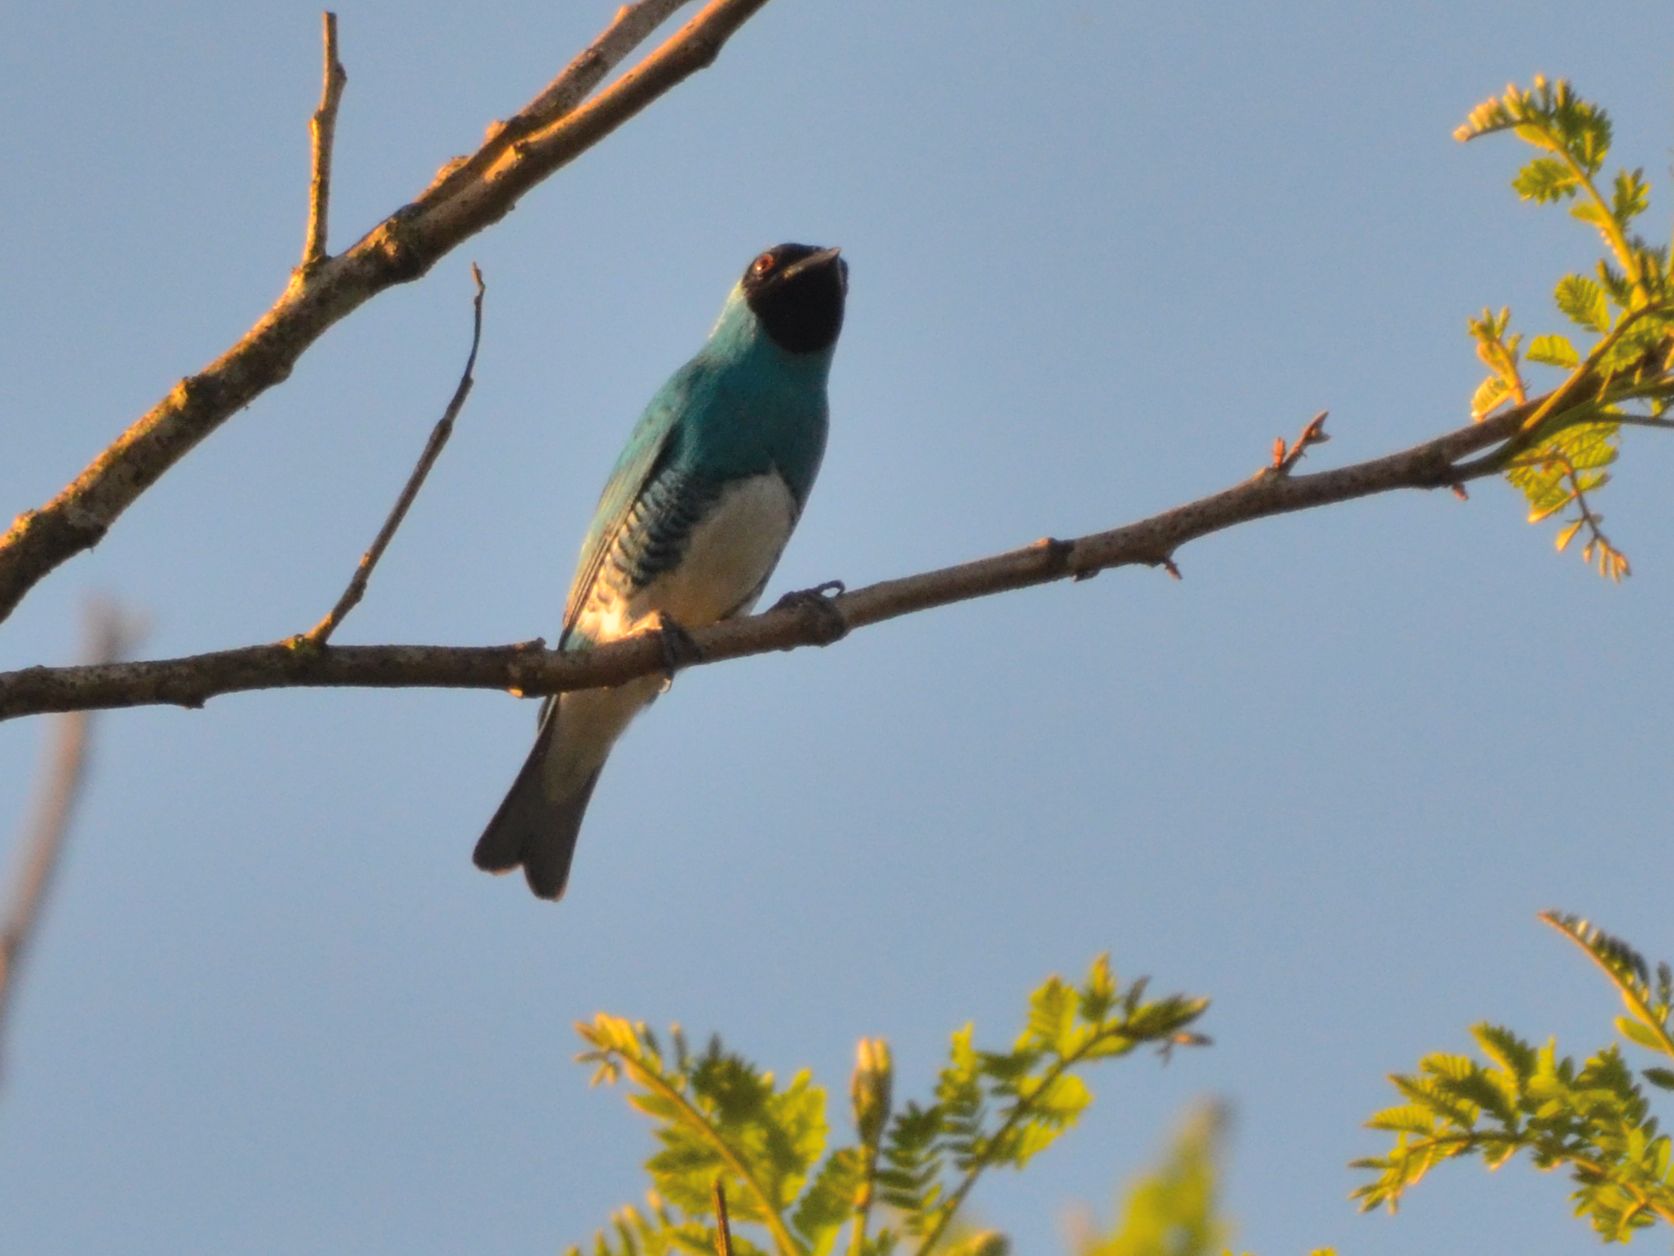 Click picture to see more Swallow Tanagers.